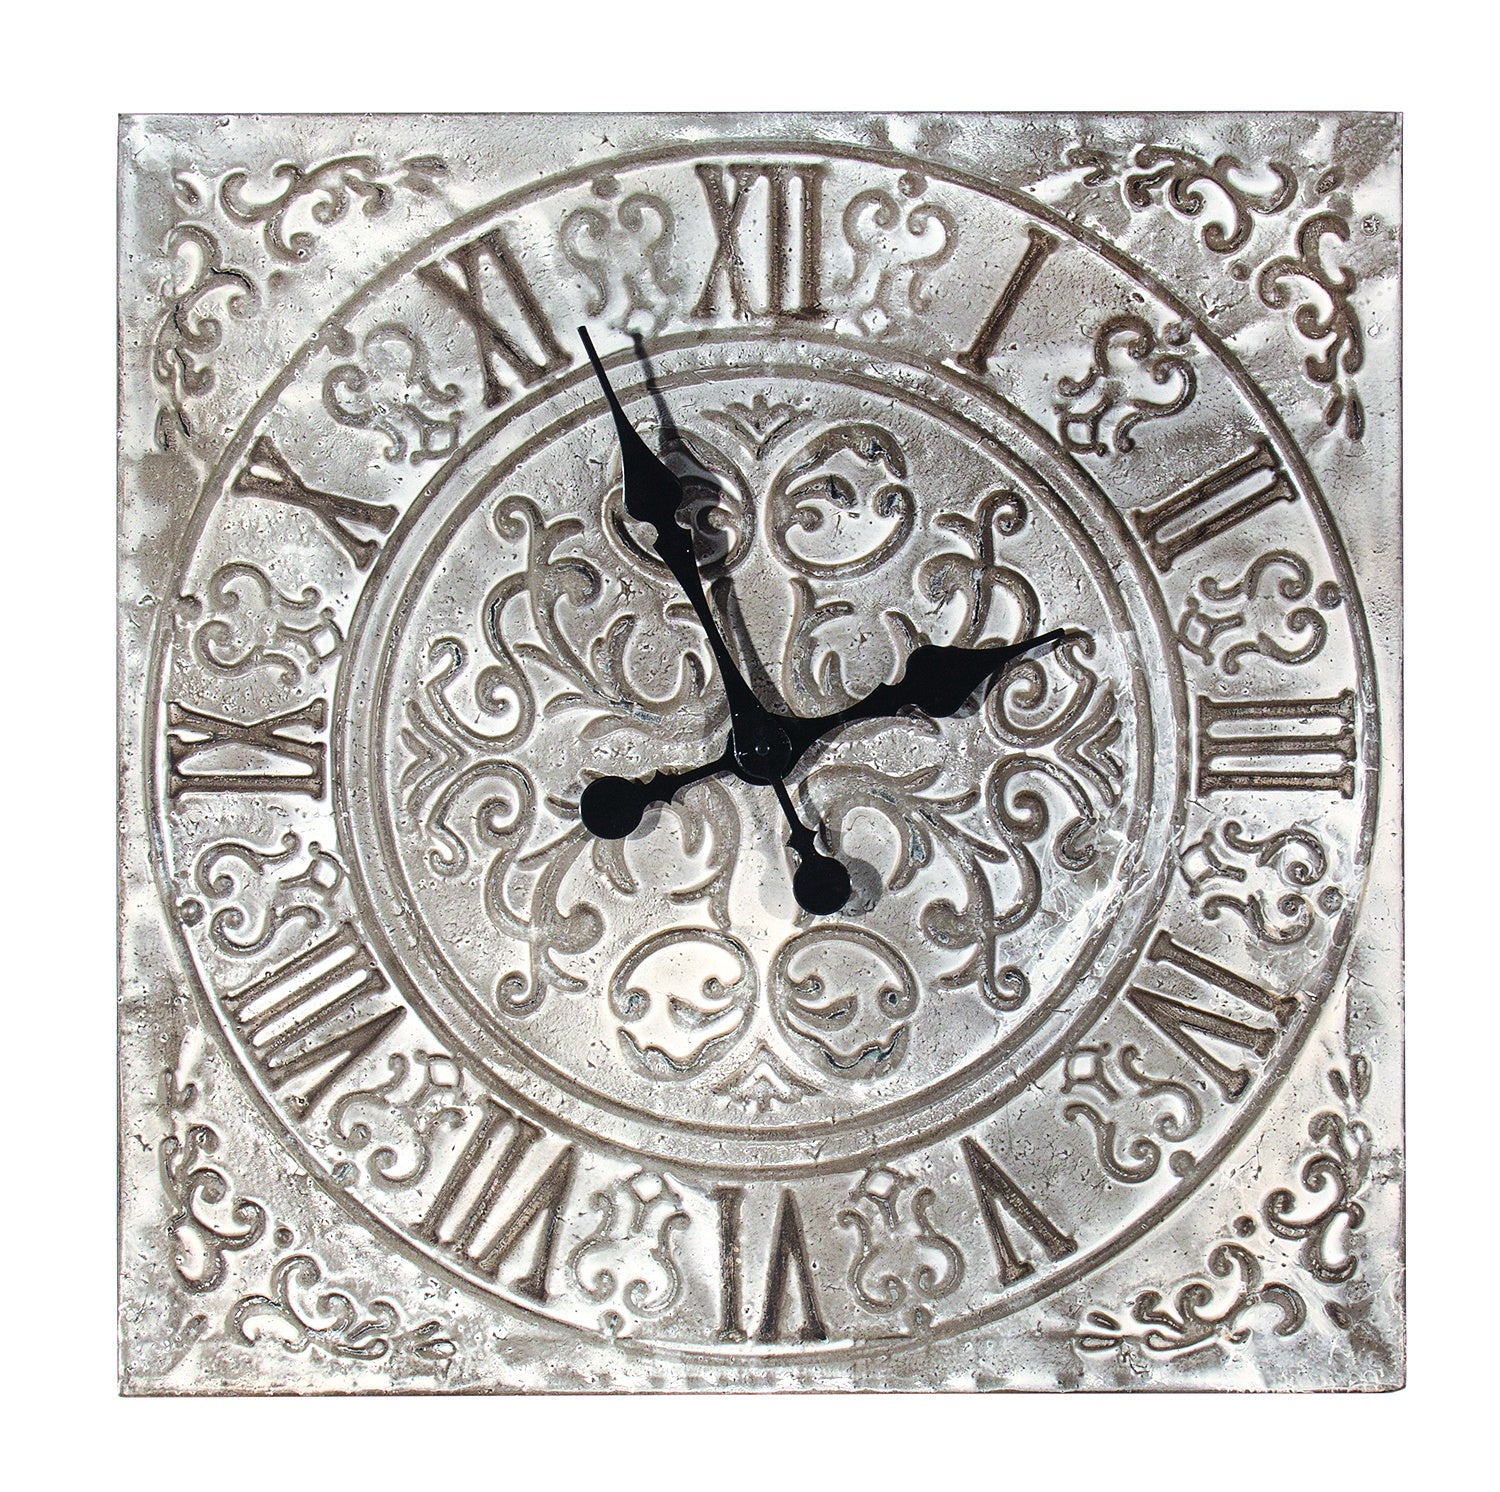 Antiqued Ceiling Tile Style Clock